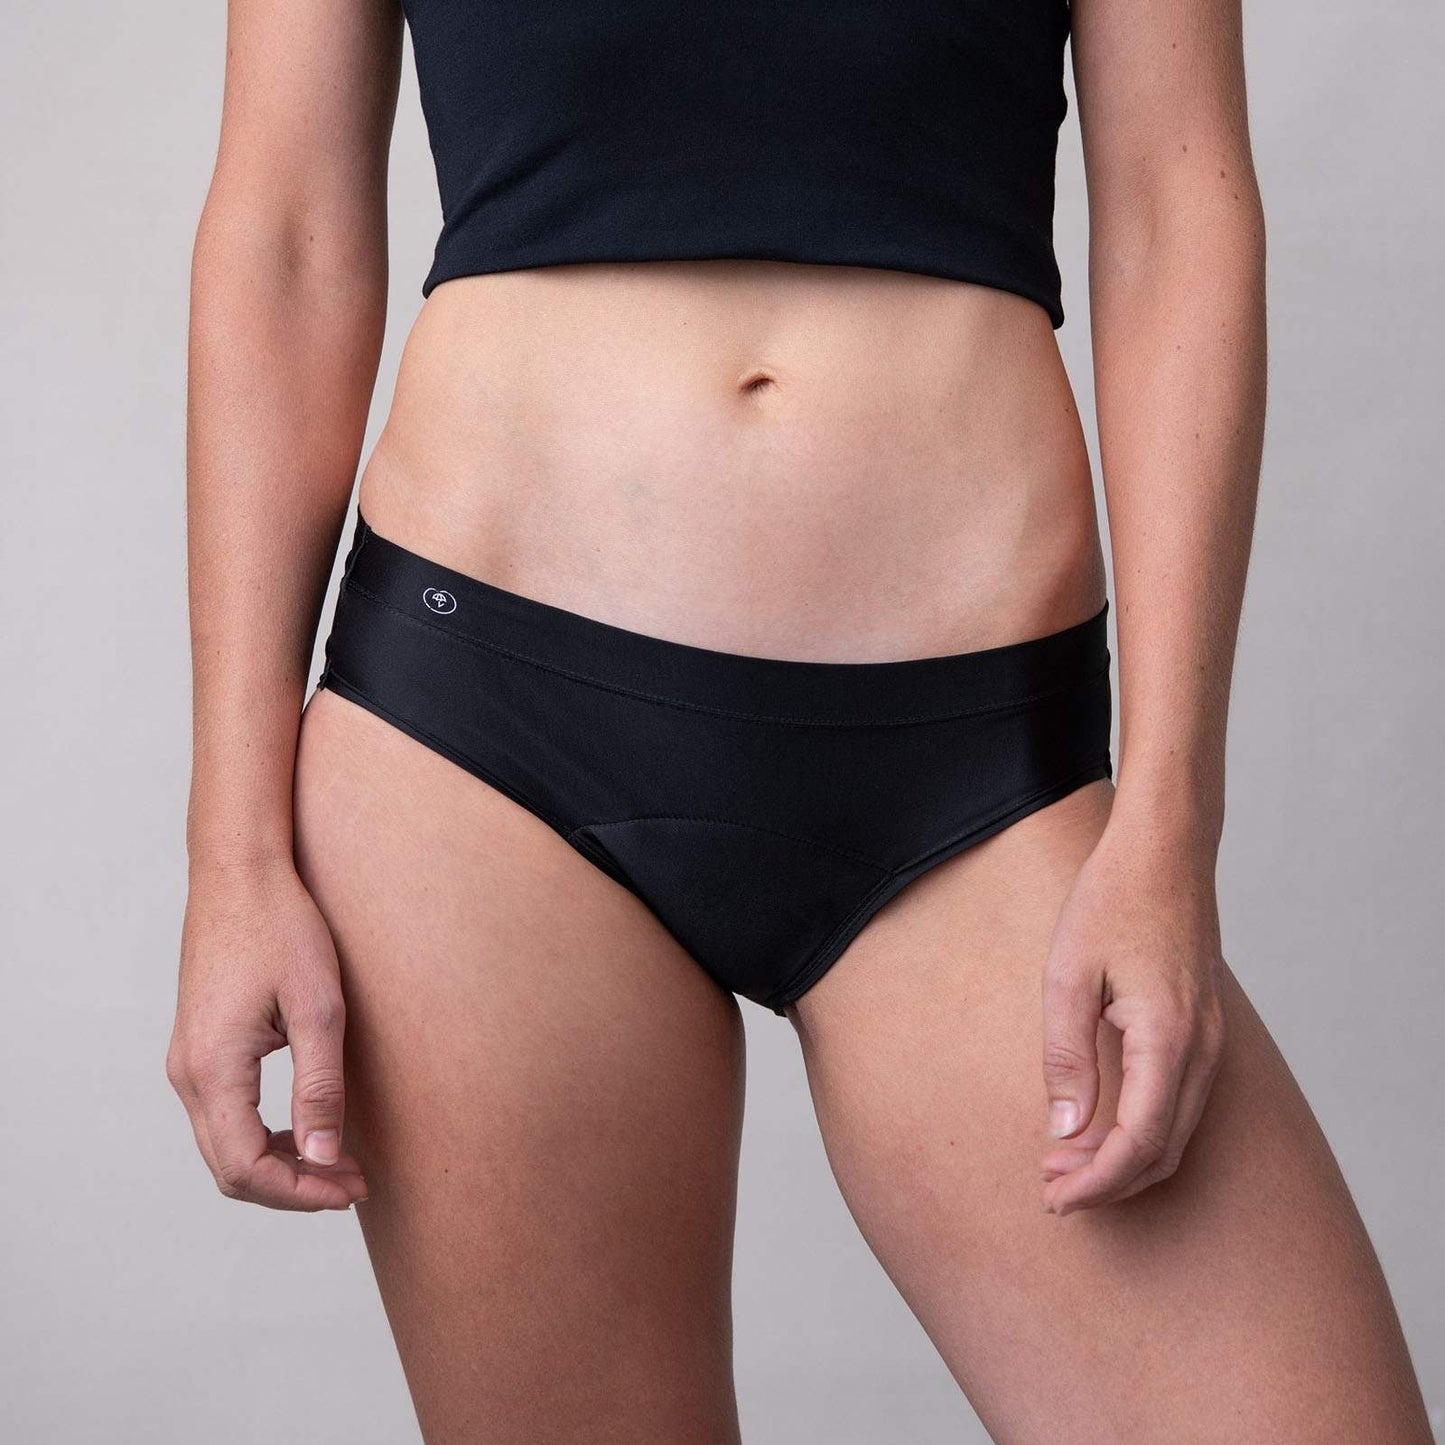 Bikini Briefs for Bladder Leaks & Periods │Heavy Protection